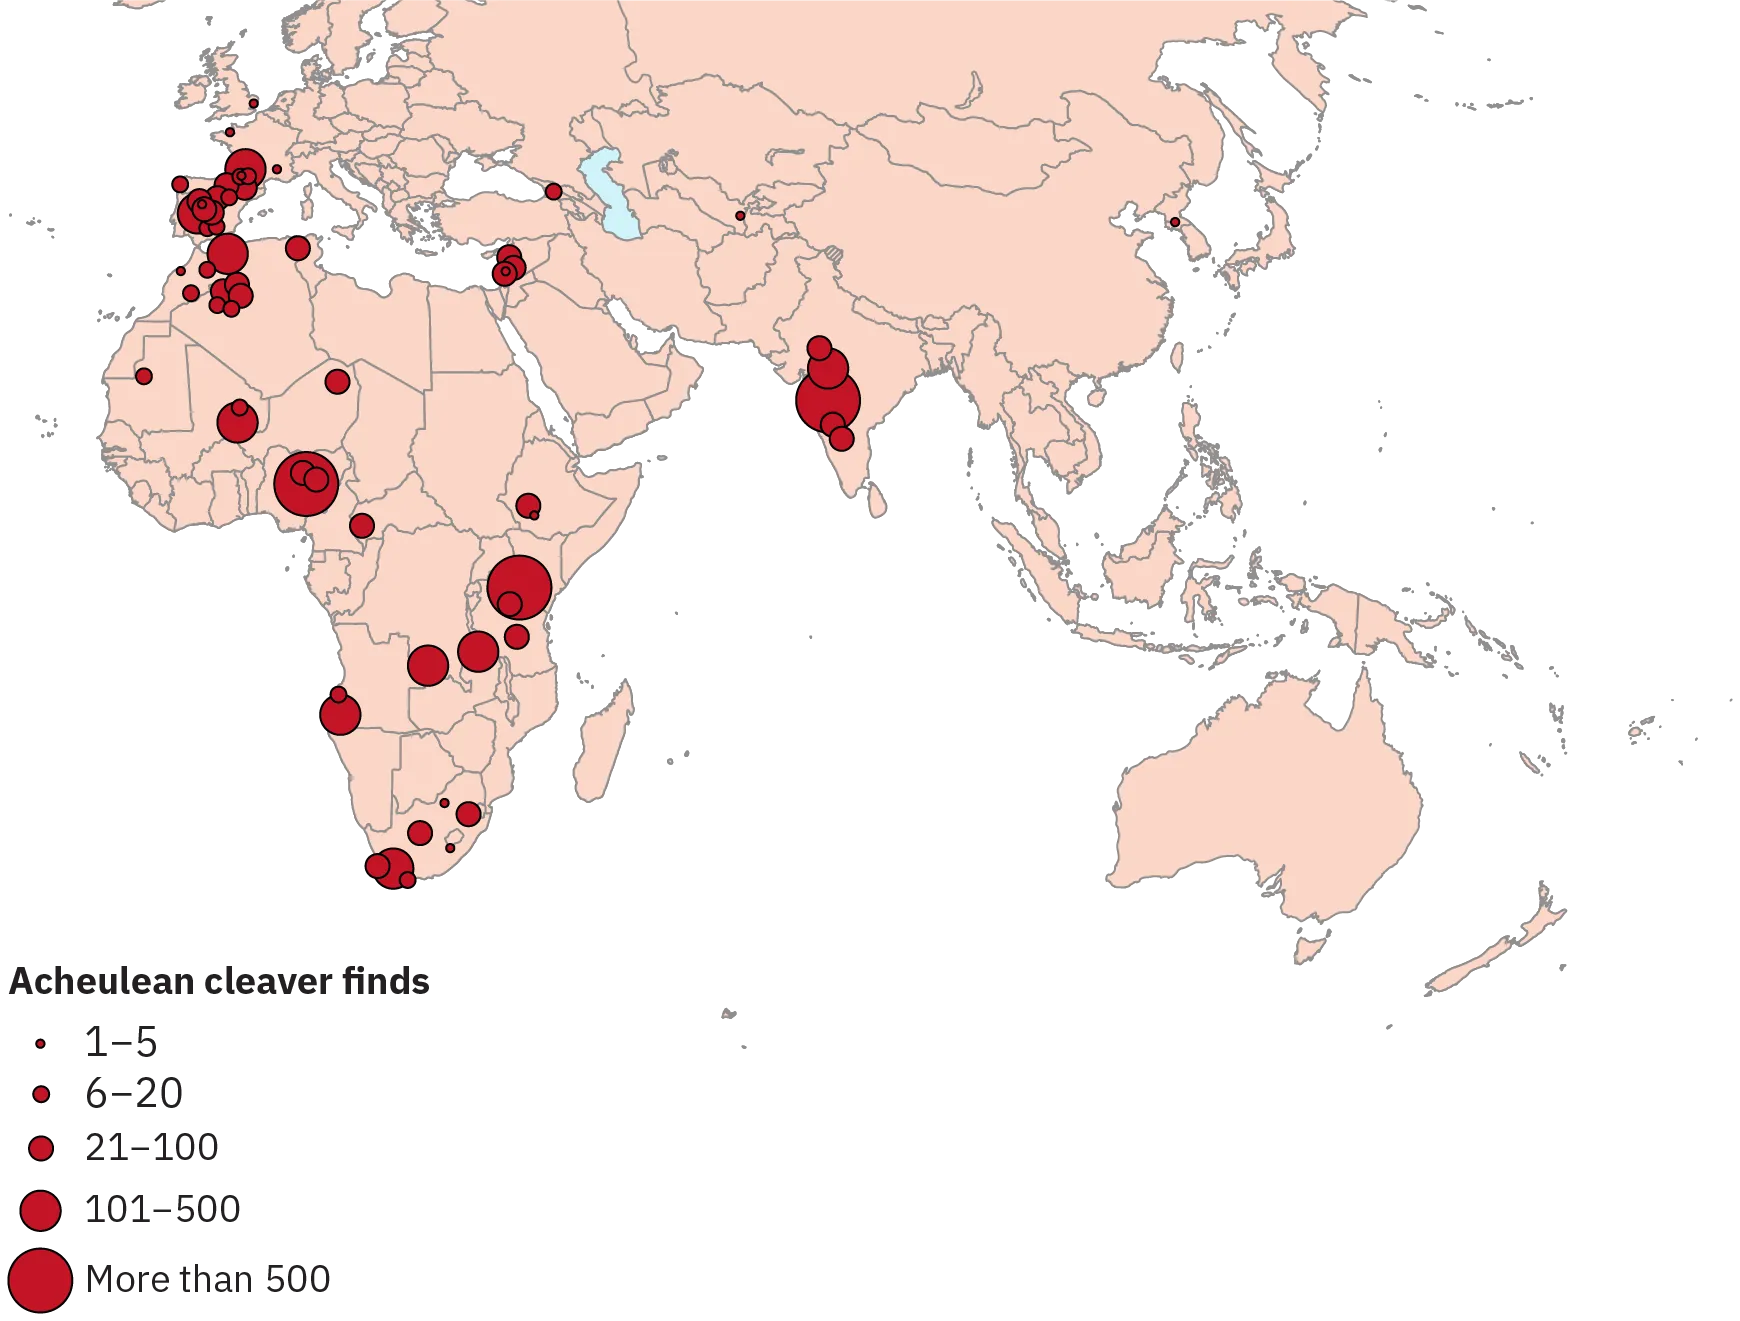 Marks indicating the number of Acheulean cleaver finds imposed on a map of Europe, Asia, and Africa. There are clusters of finds in Spain, India, and certain areas of Africa.